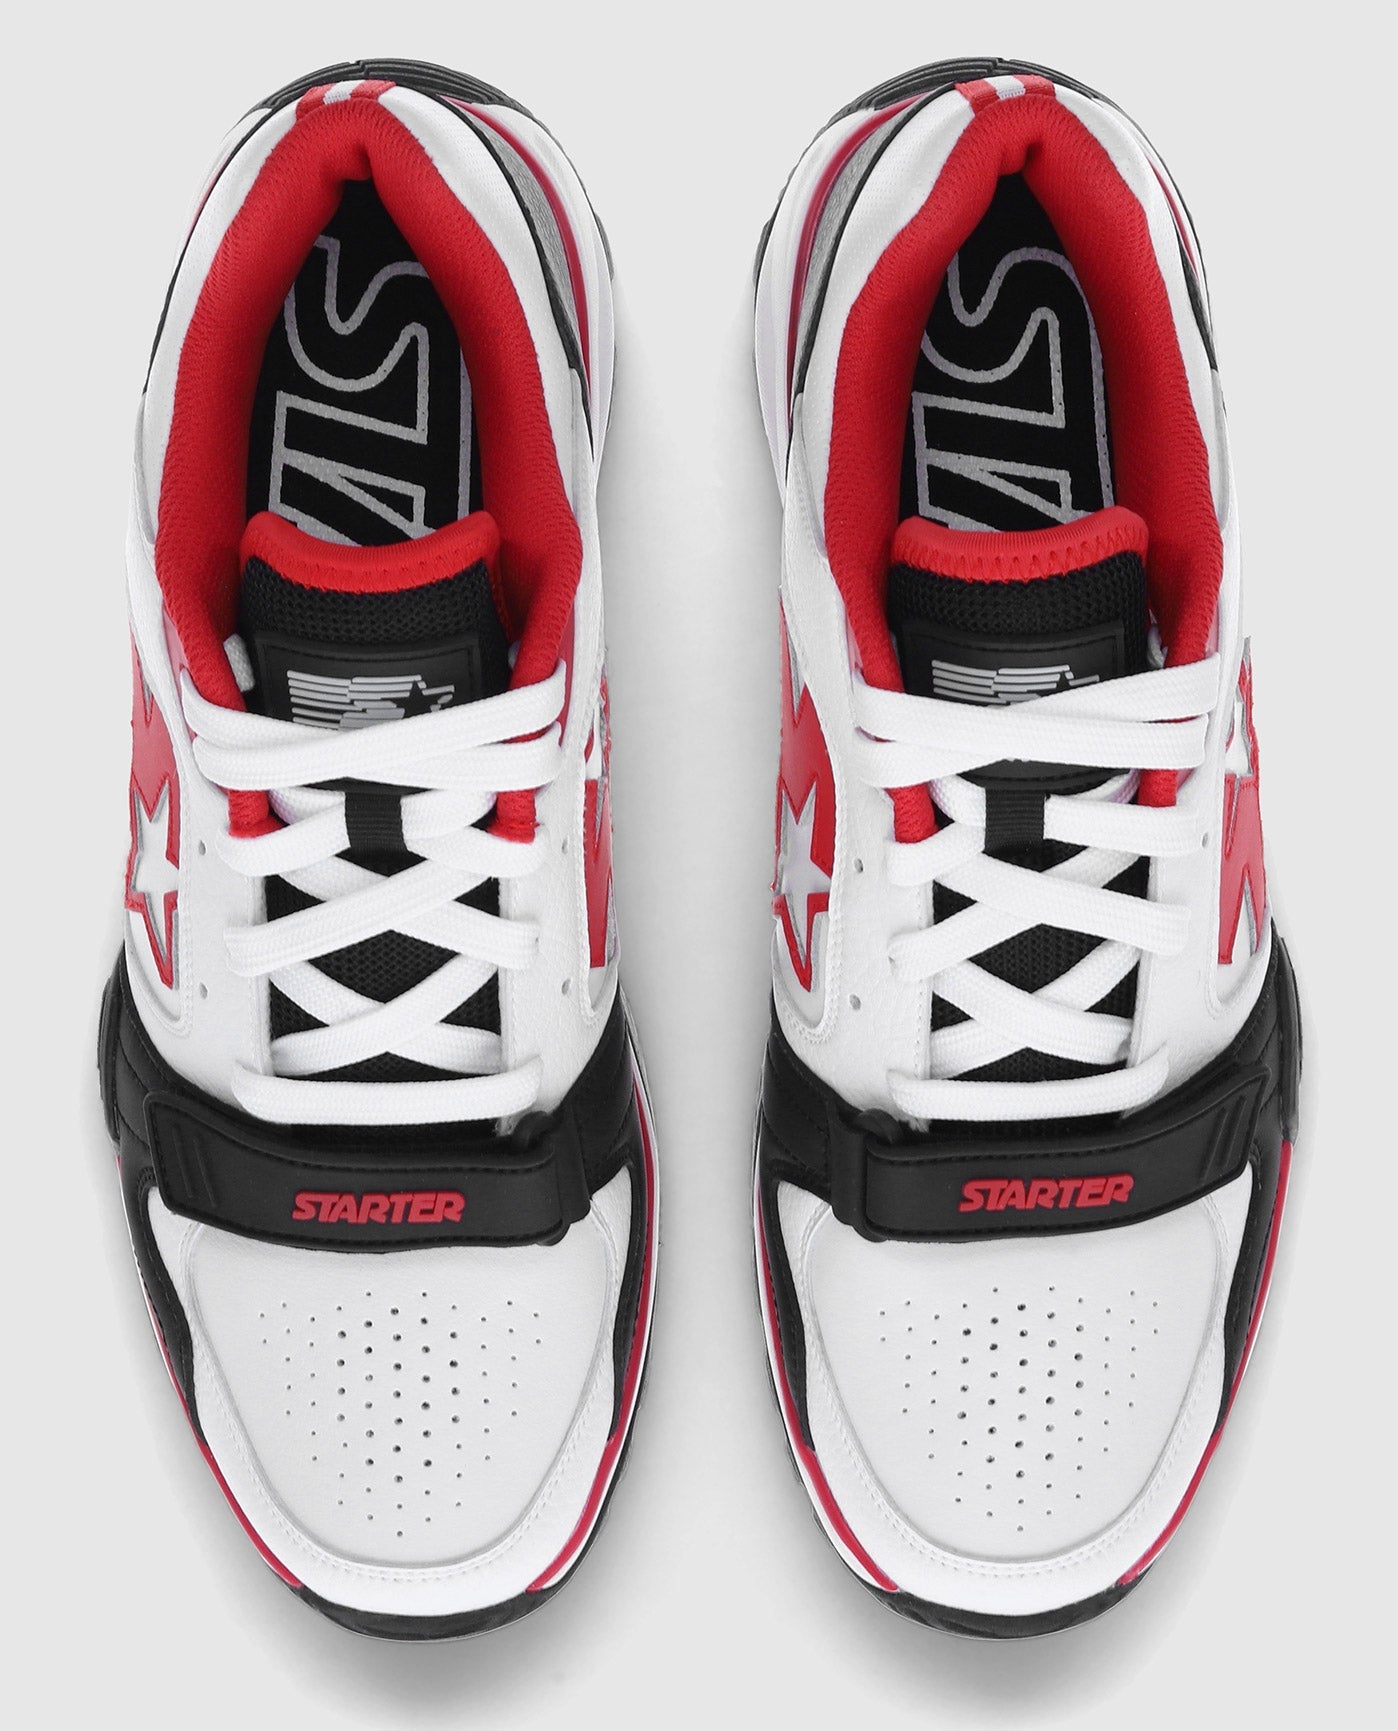 Top Angle Of Starter Team Trainer 92 Low Red Sneaker Pair | Red